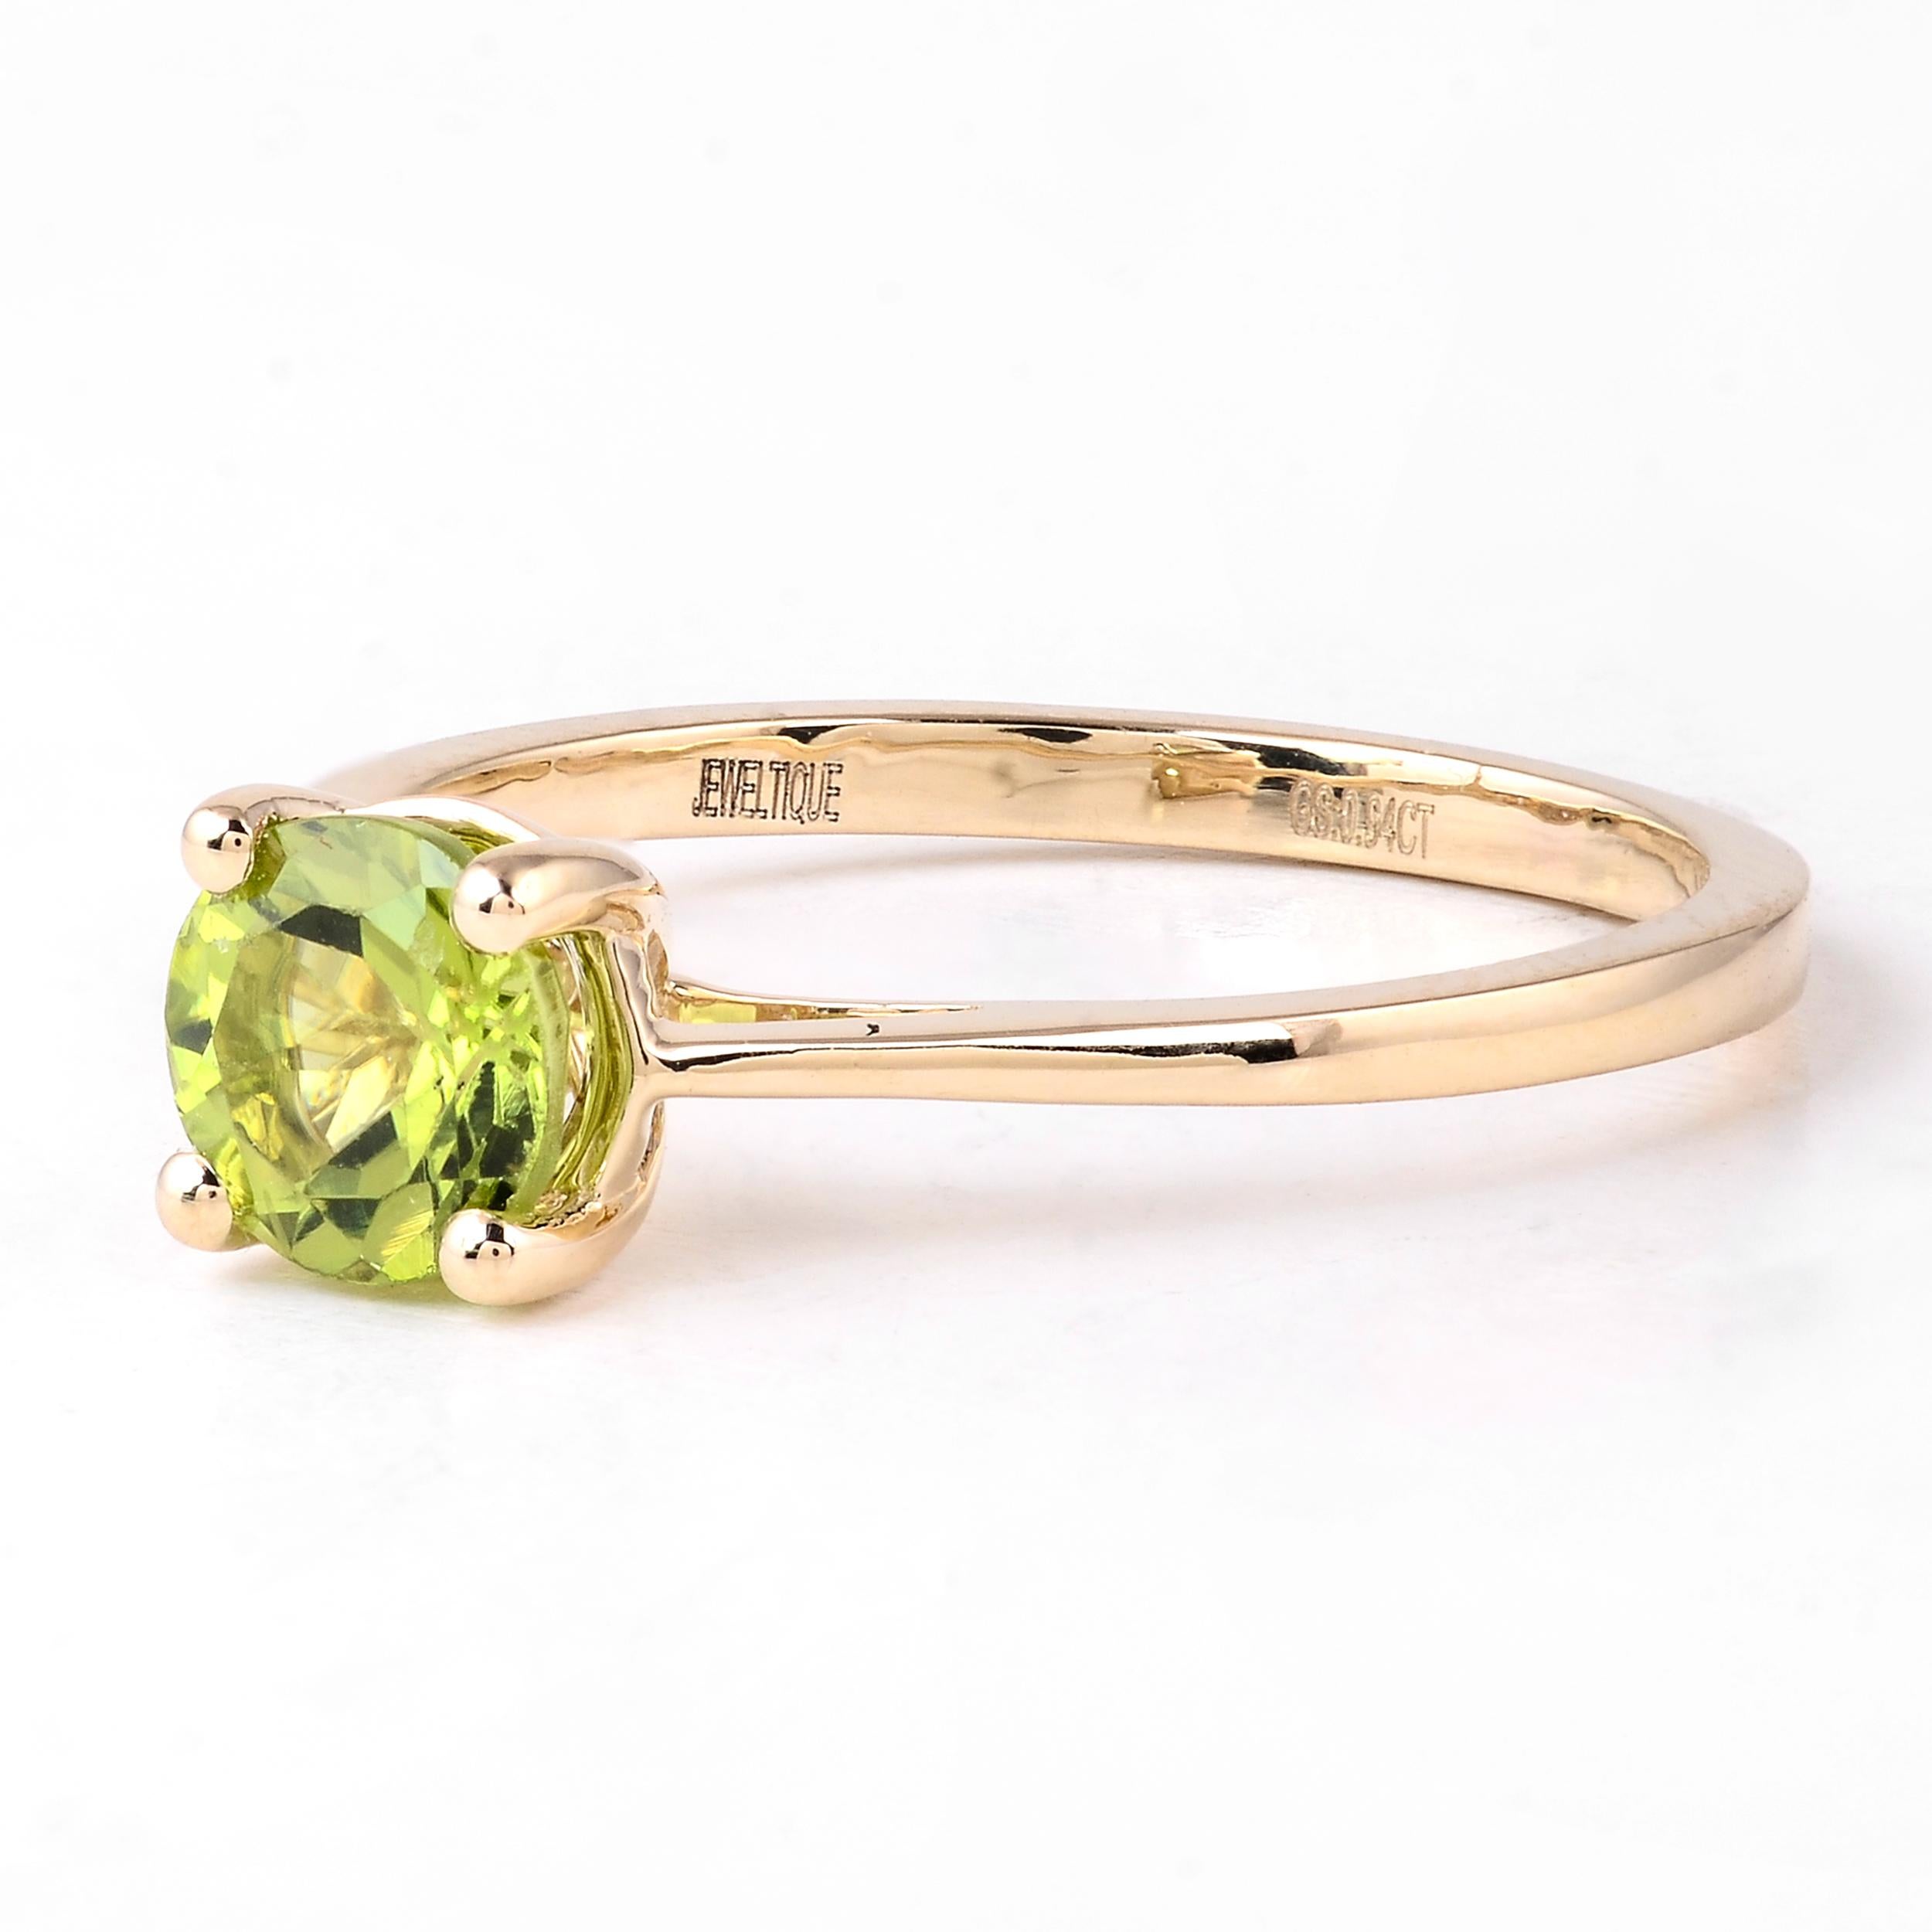 Women's Elegant 14K Peridot Cocktail Ring, Size 7 - Stunning Statement Jewelry Piece For Sale